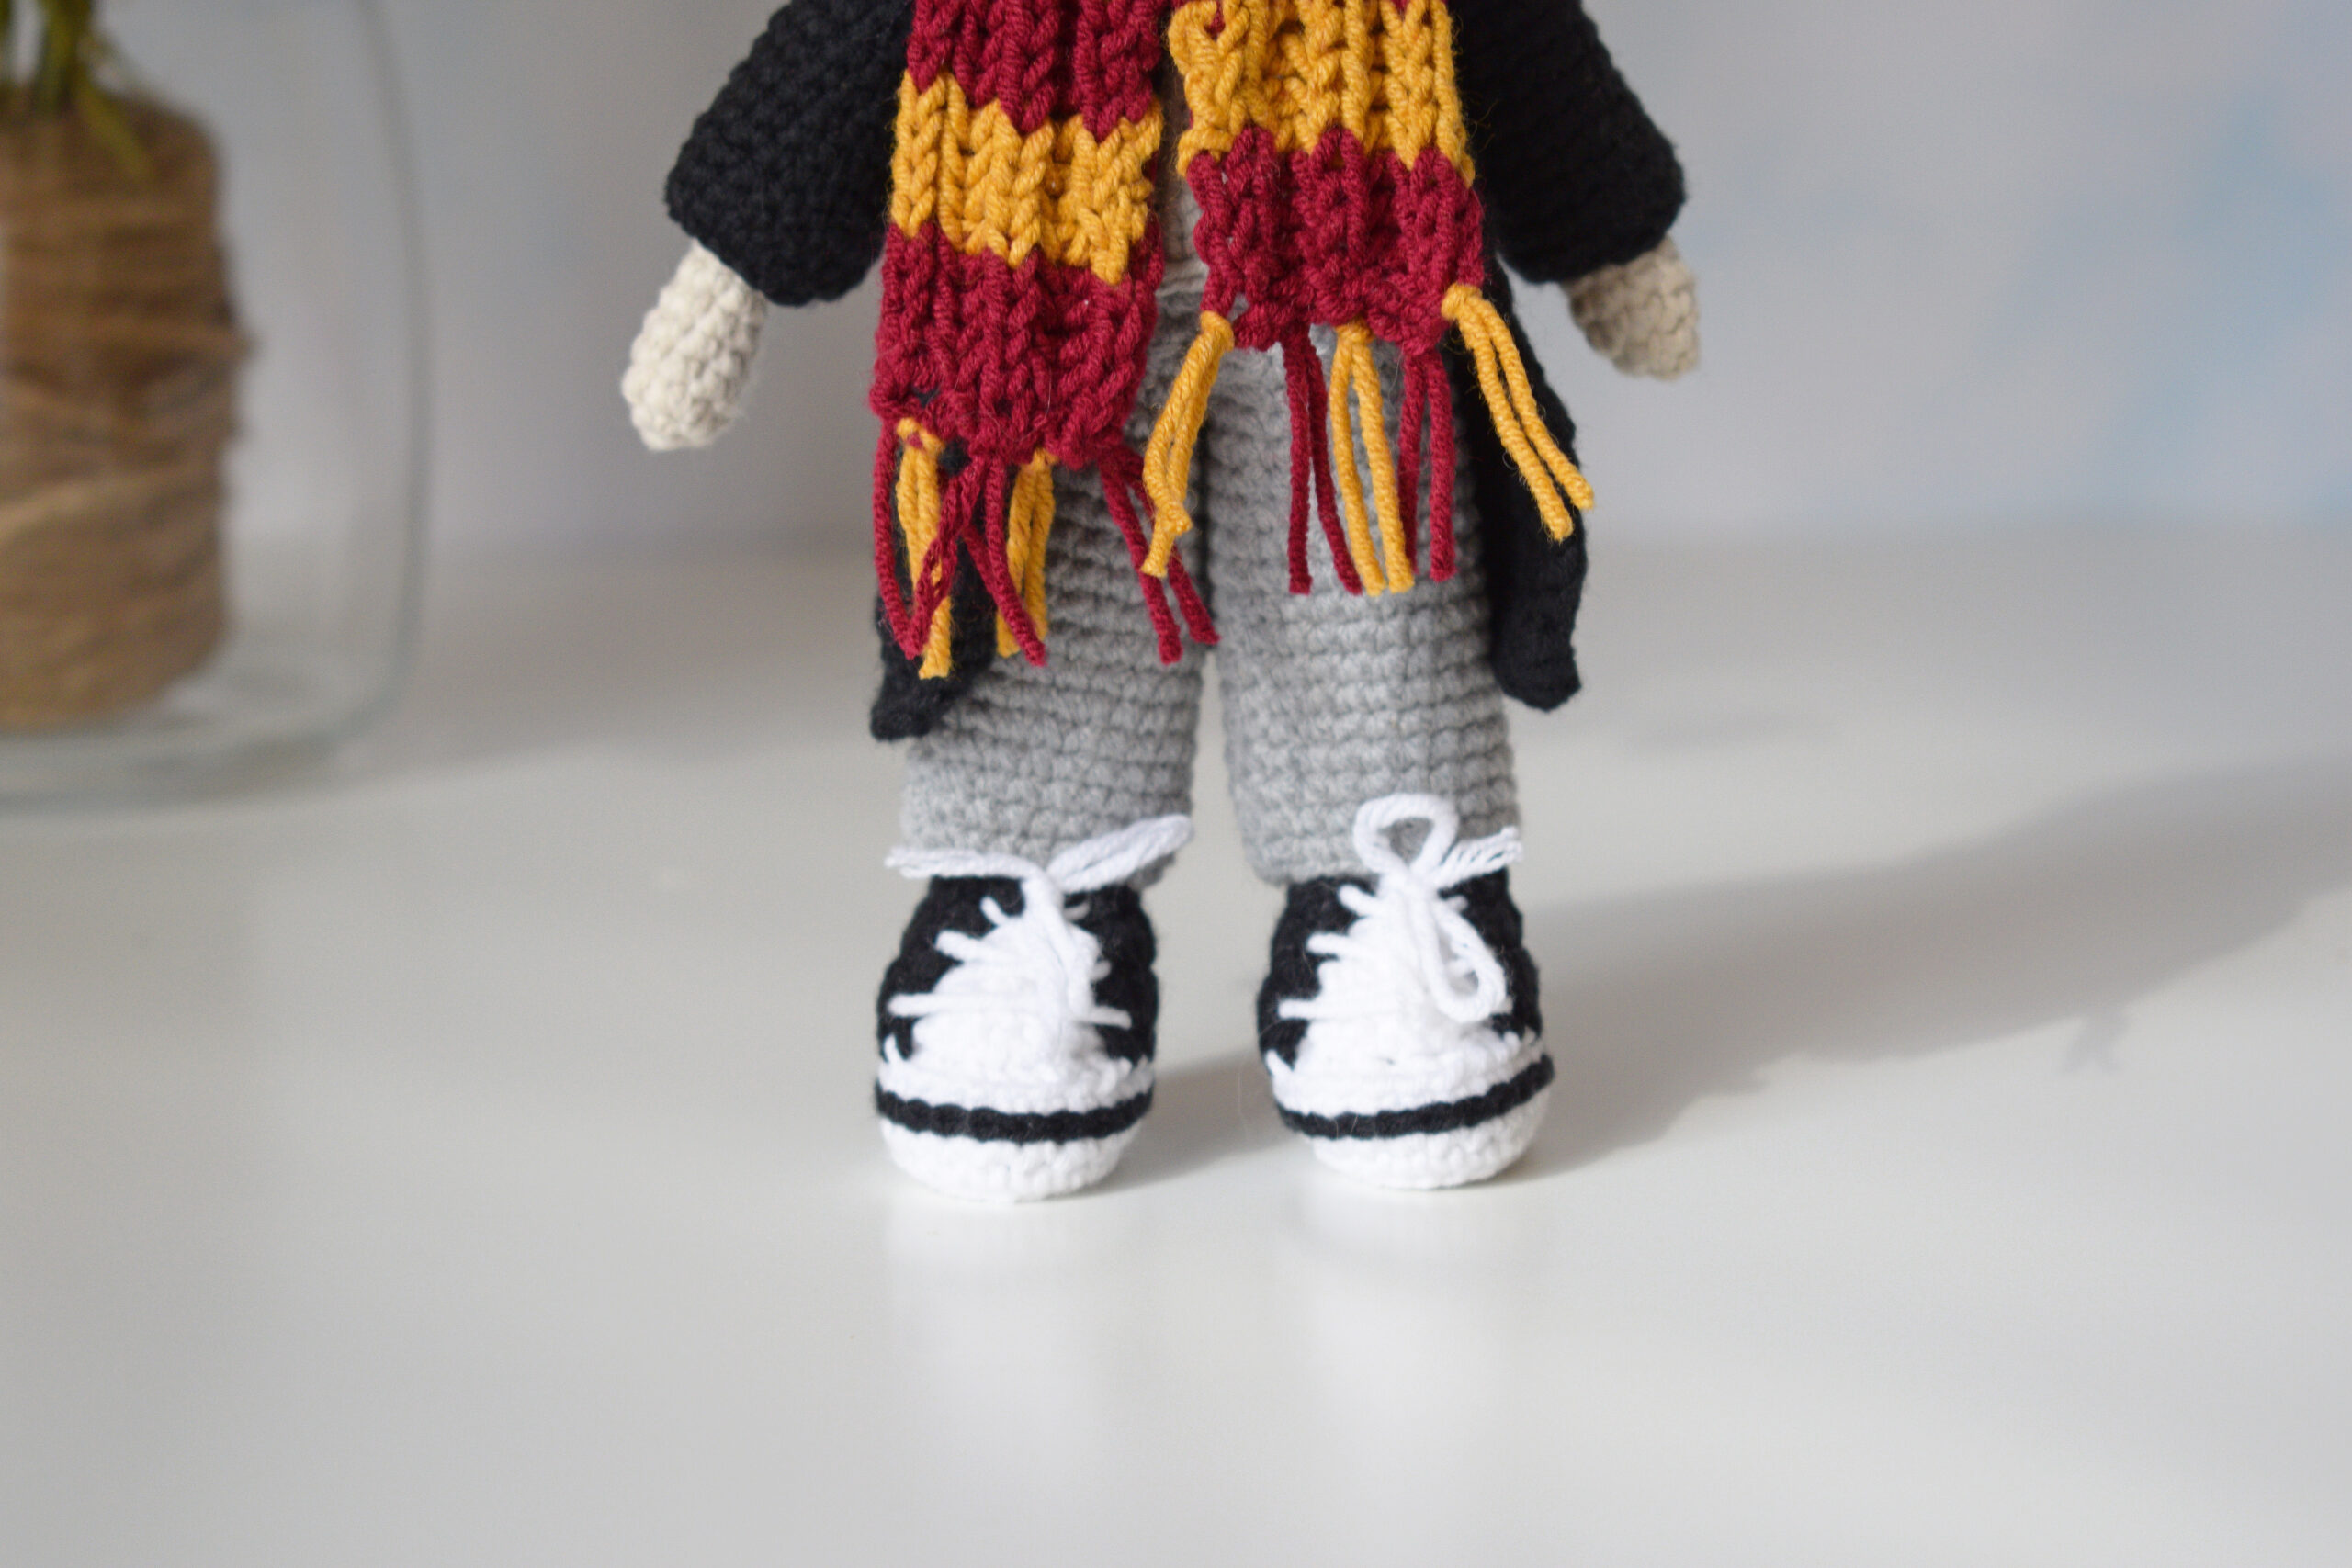 Reply to @laziesloth What's included in the Harry Pottter Crochet Wiza